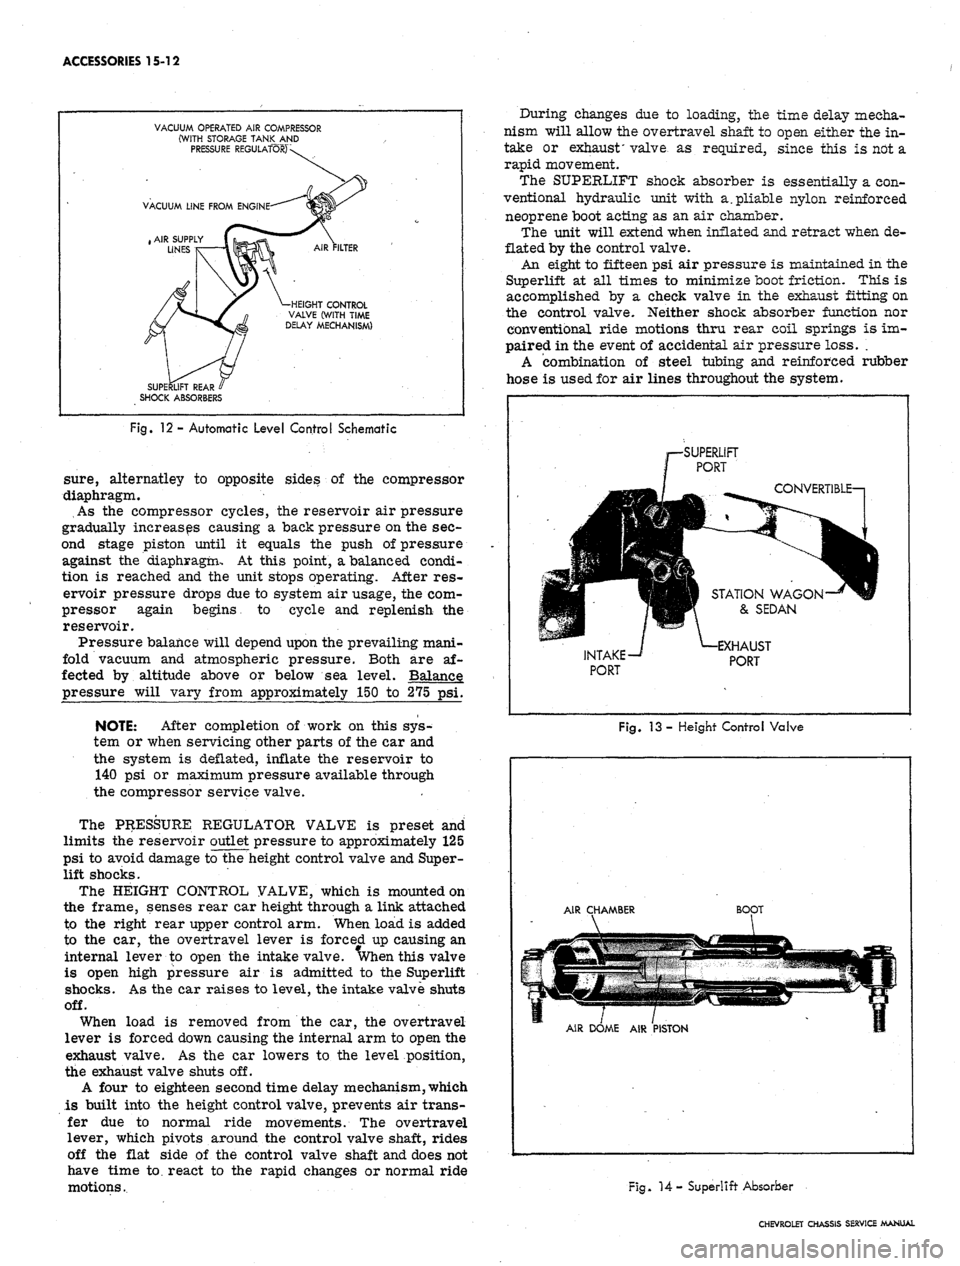 CHEVROLET CAMARO 1967 1.G Chassis Workshop Manual 
ACCESSORIES 15-12

VACUUM

(WIT

P

VACUUM Llh

, AIR SUPPt

LINES

t

SUPERLIFT F

SHOCK ABSO 
OPERATED AIR COMPRESSOR

H STORAGE TANK AND

RESSURE REGULATORJV

\A

4E FROM ENG«NE^"^<E|$r

/ \-HEIG